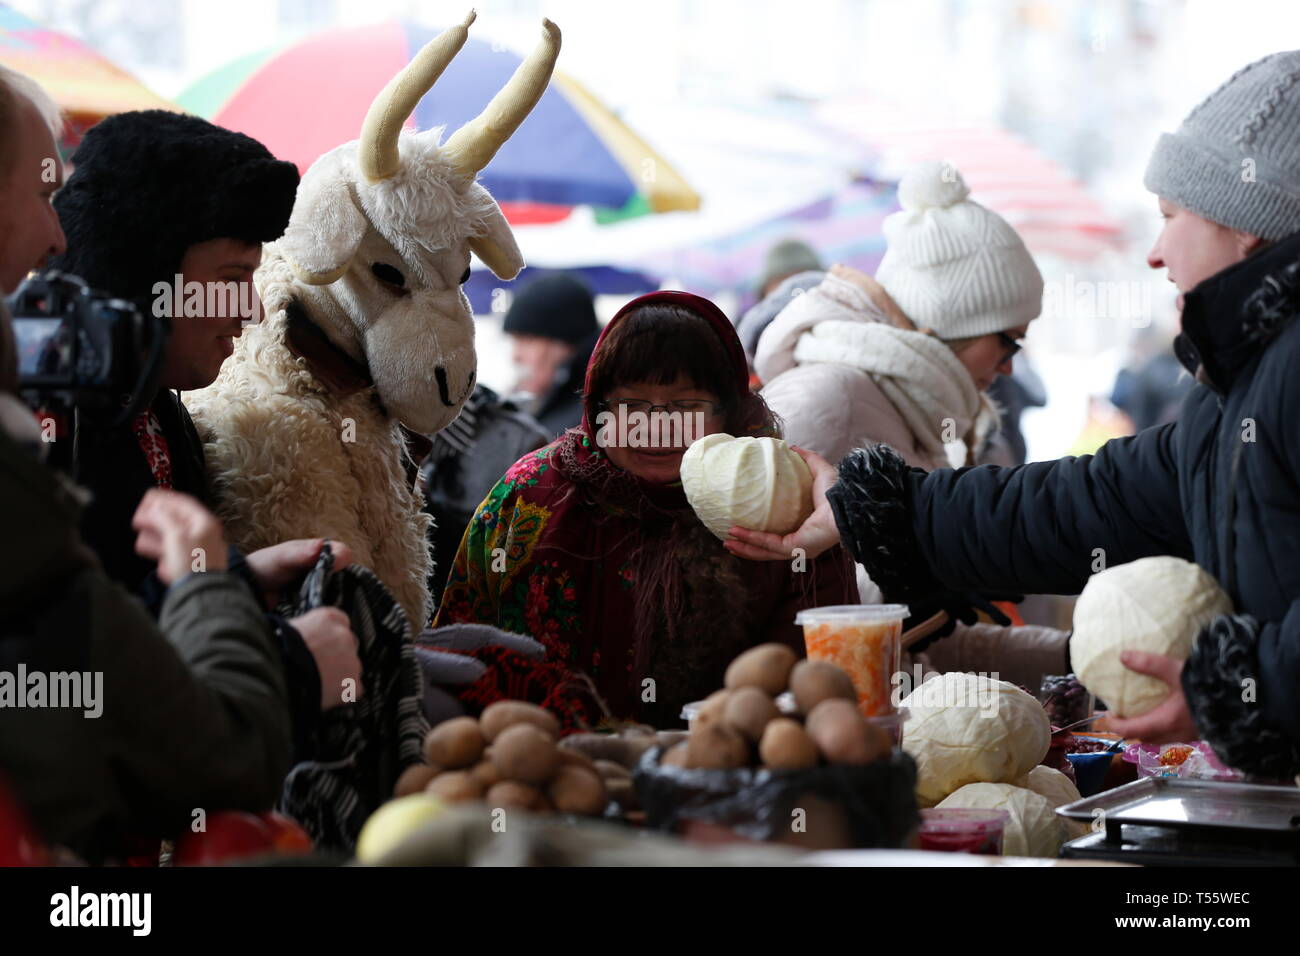 Belarus, Gomel, January 13, 2017.Central market. The ritual of Kalyada is generous. People donate gifts to the goat at the ritual Stock Photo